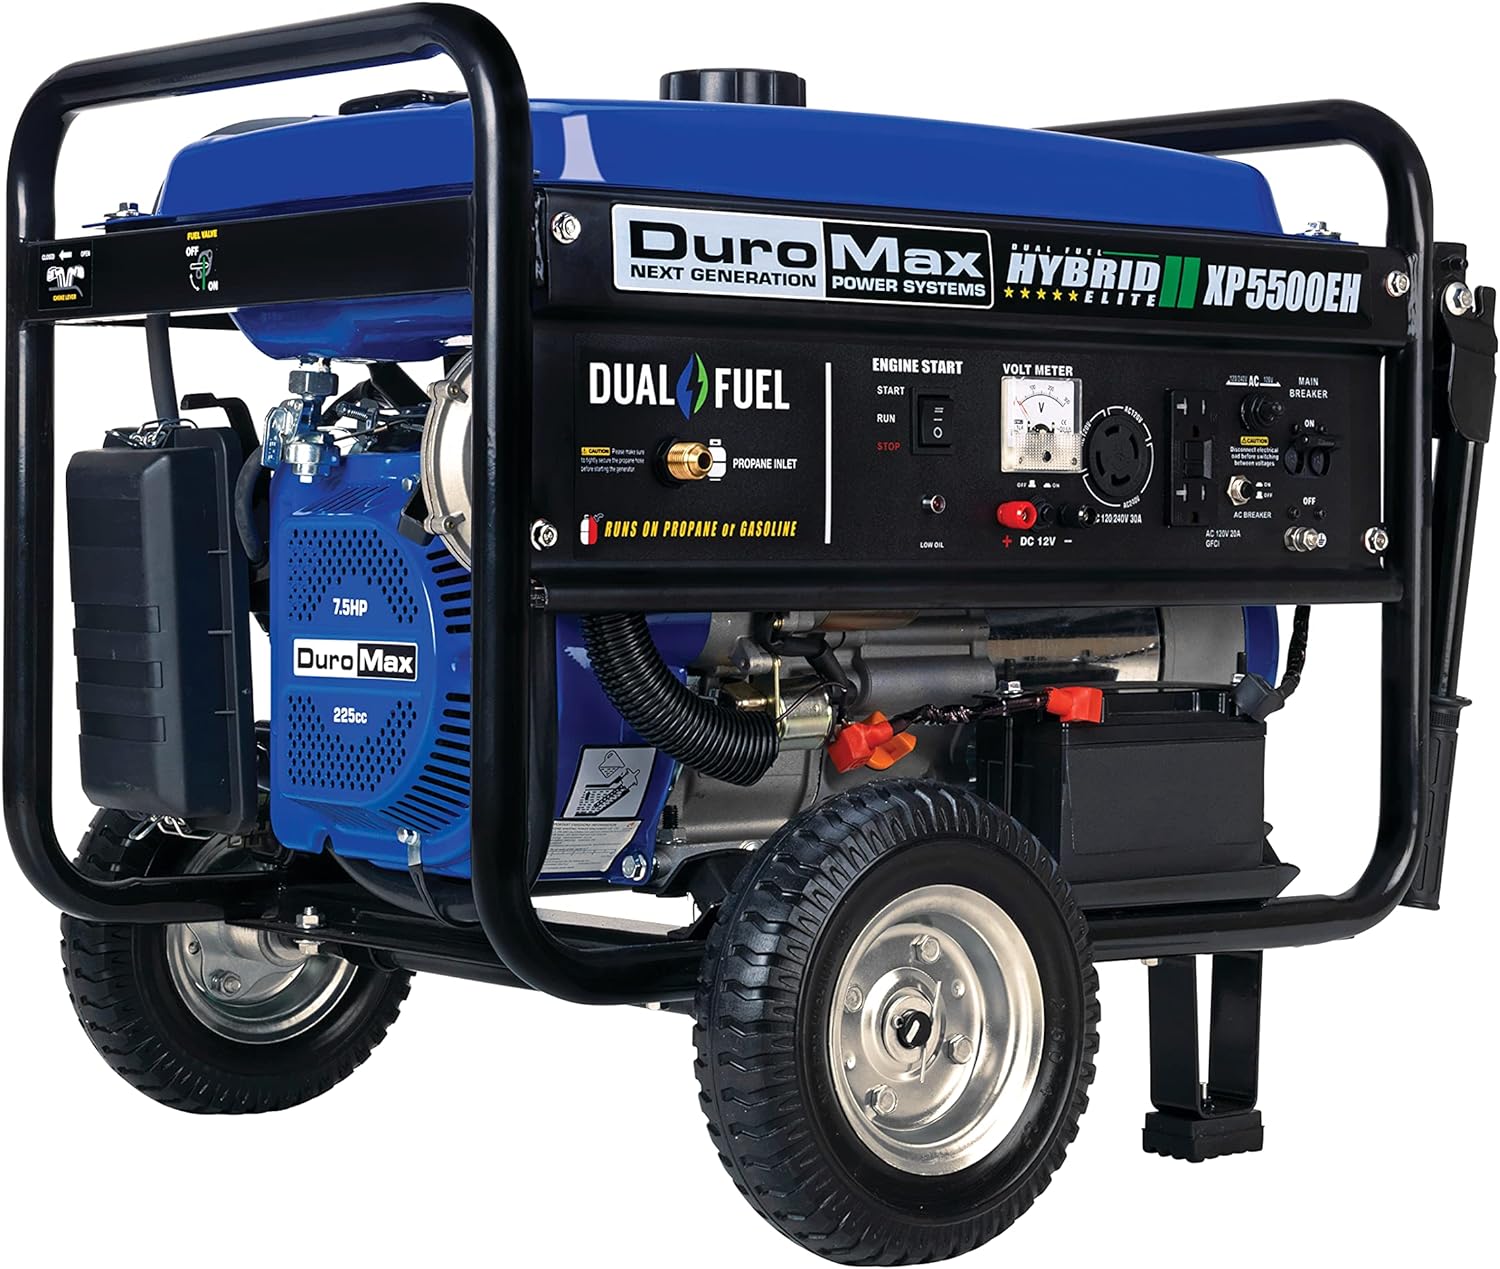 DuroMax XP5500EH Portable Generator Review